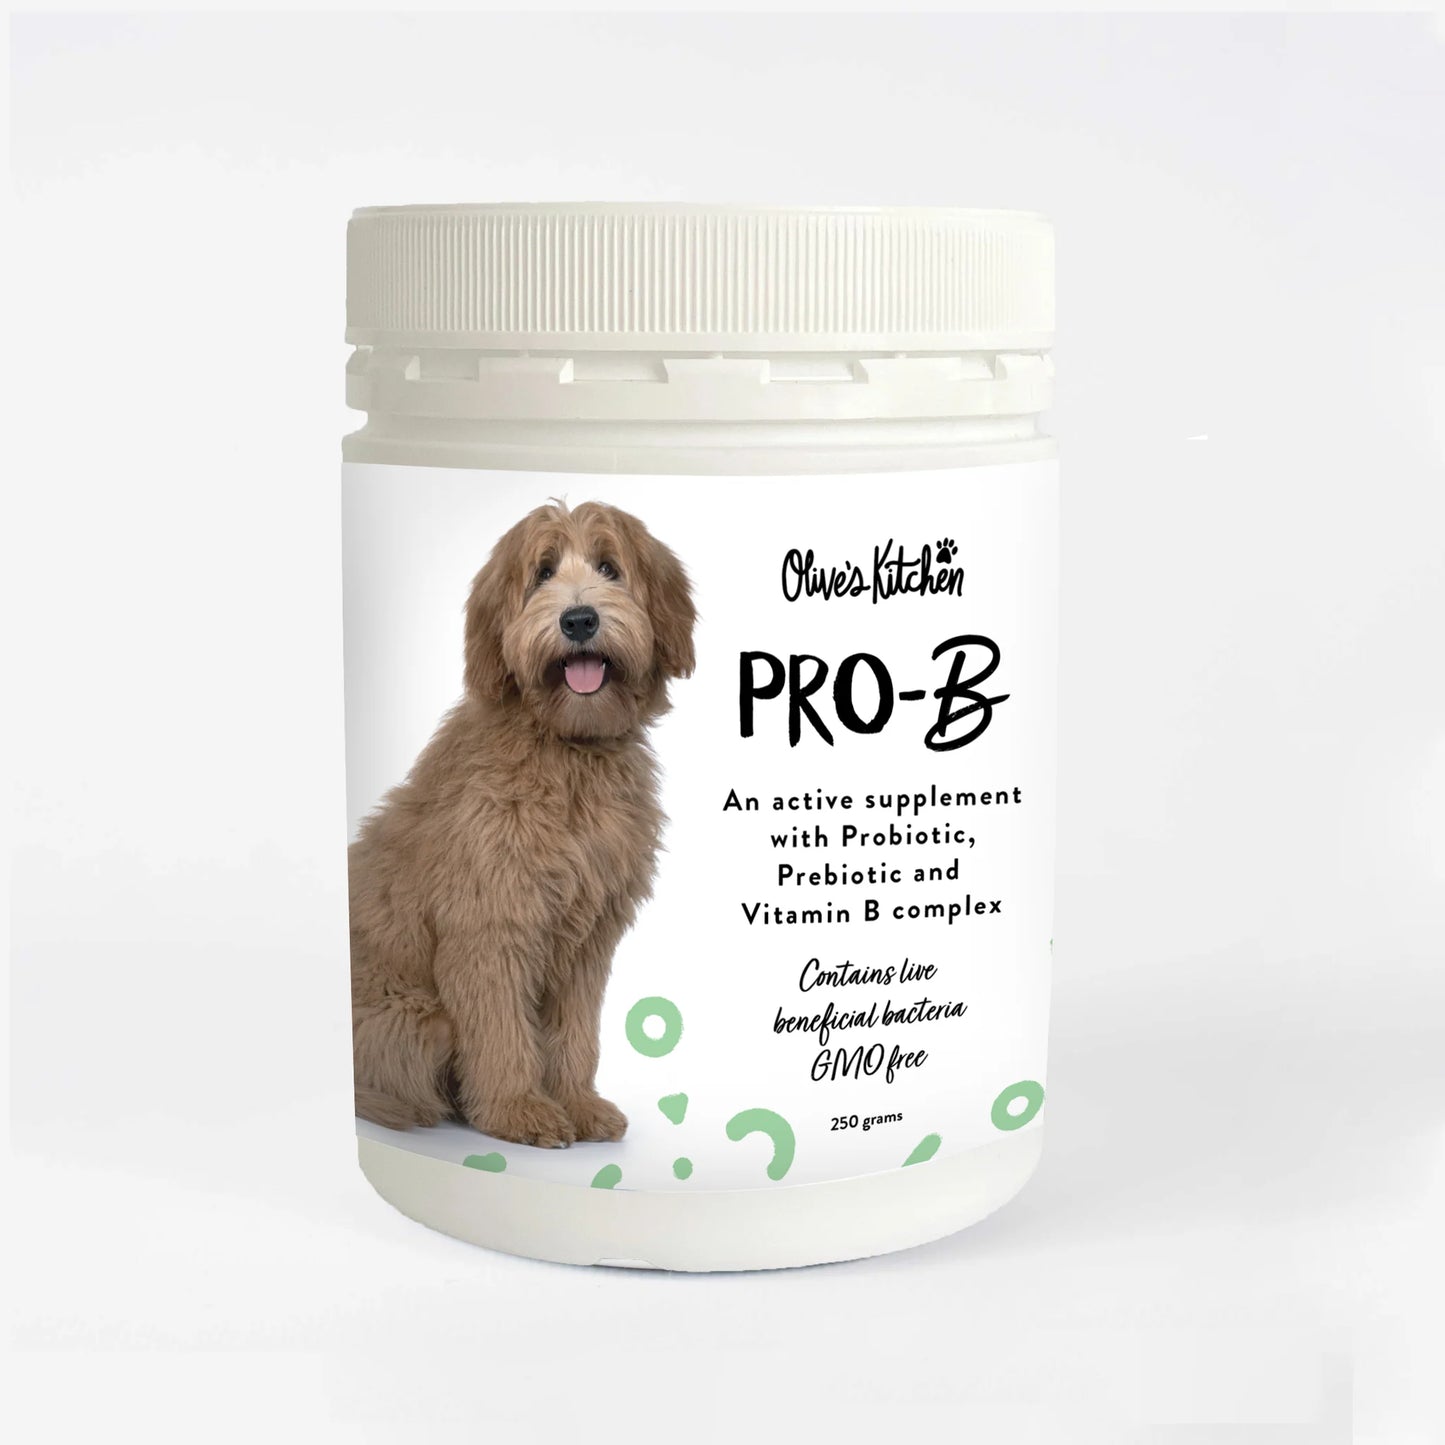 A jar of Doggy Daily Nutritional Boost - Pro-B supplement for dogs from Your Whole Dog.